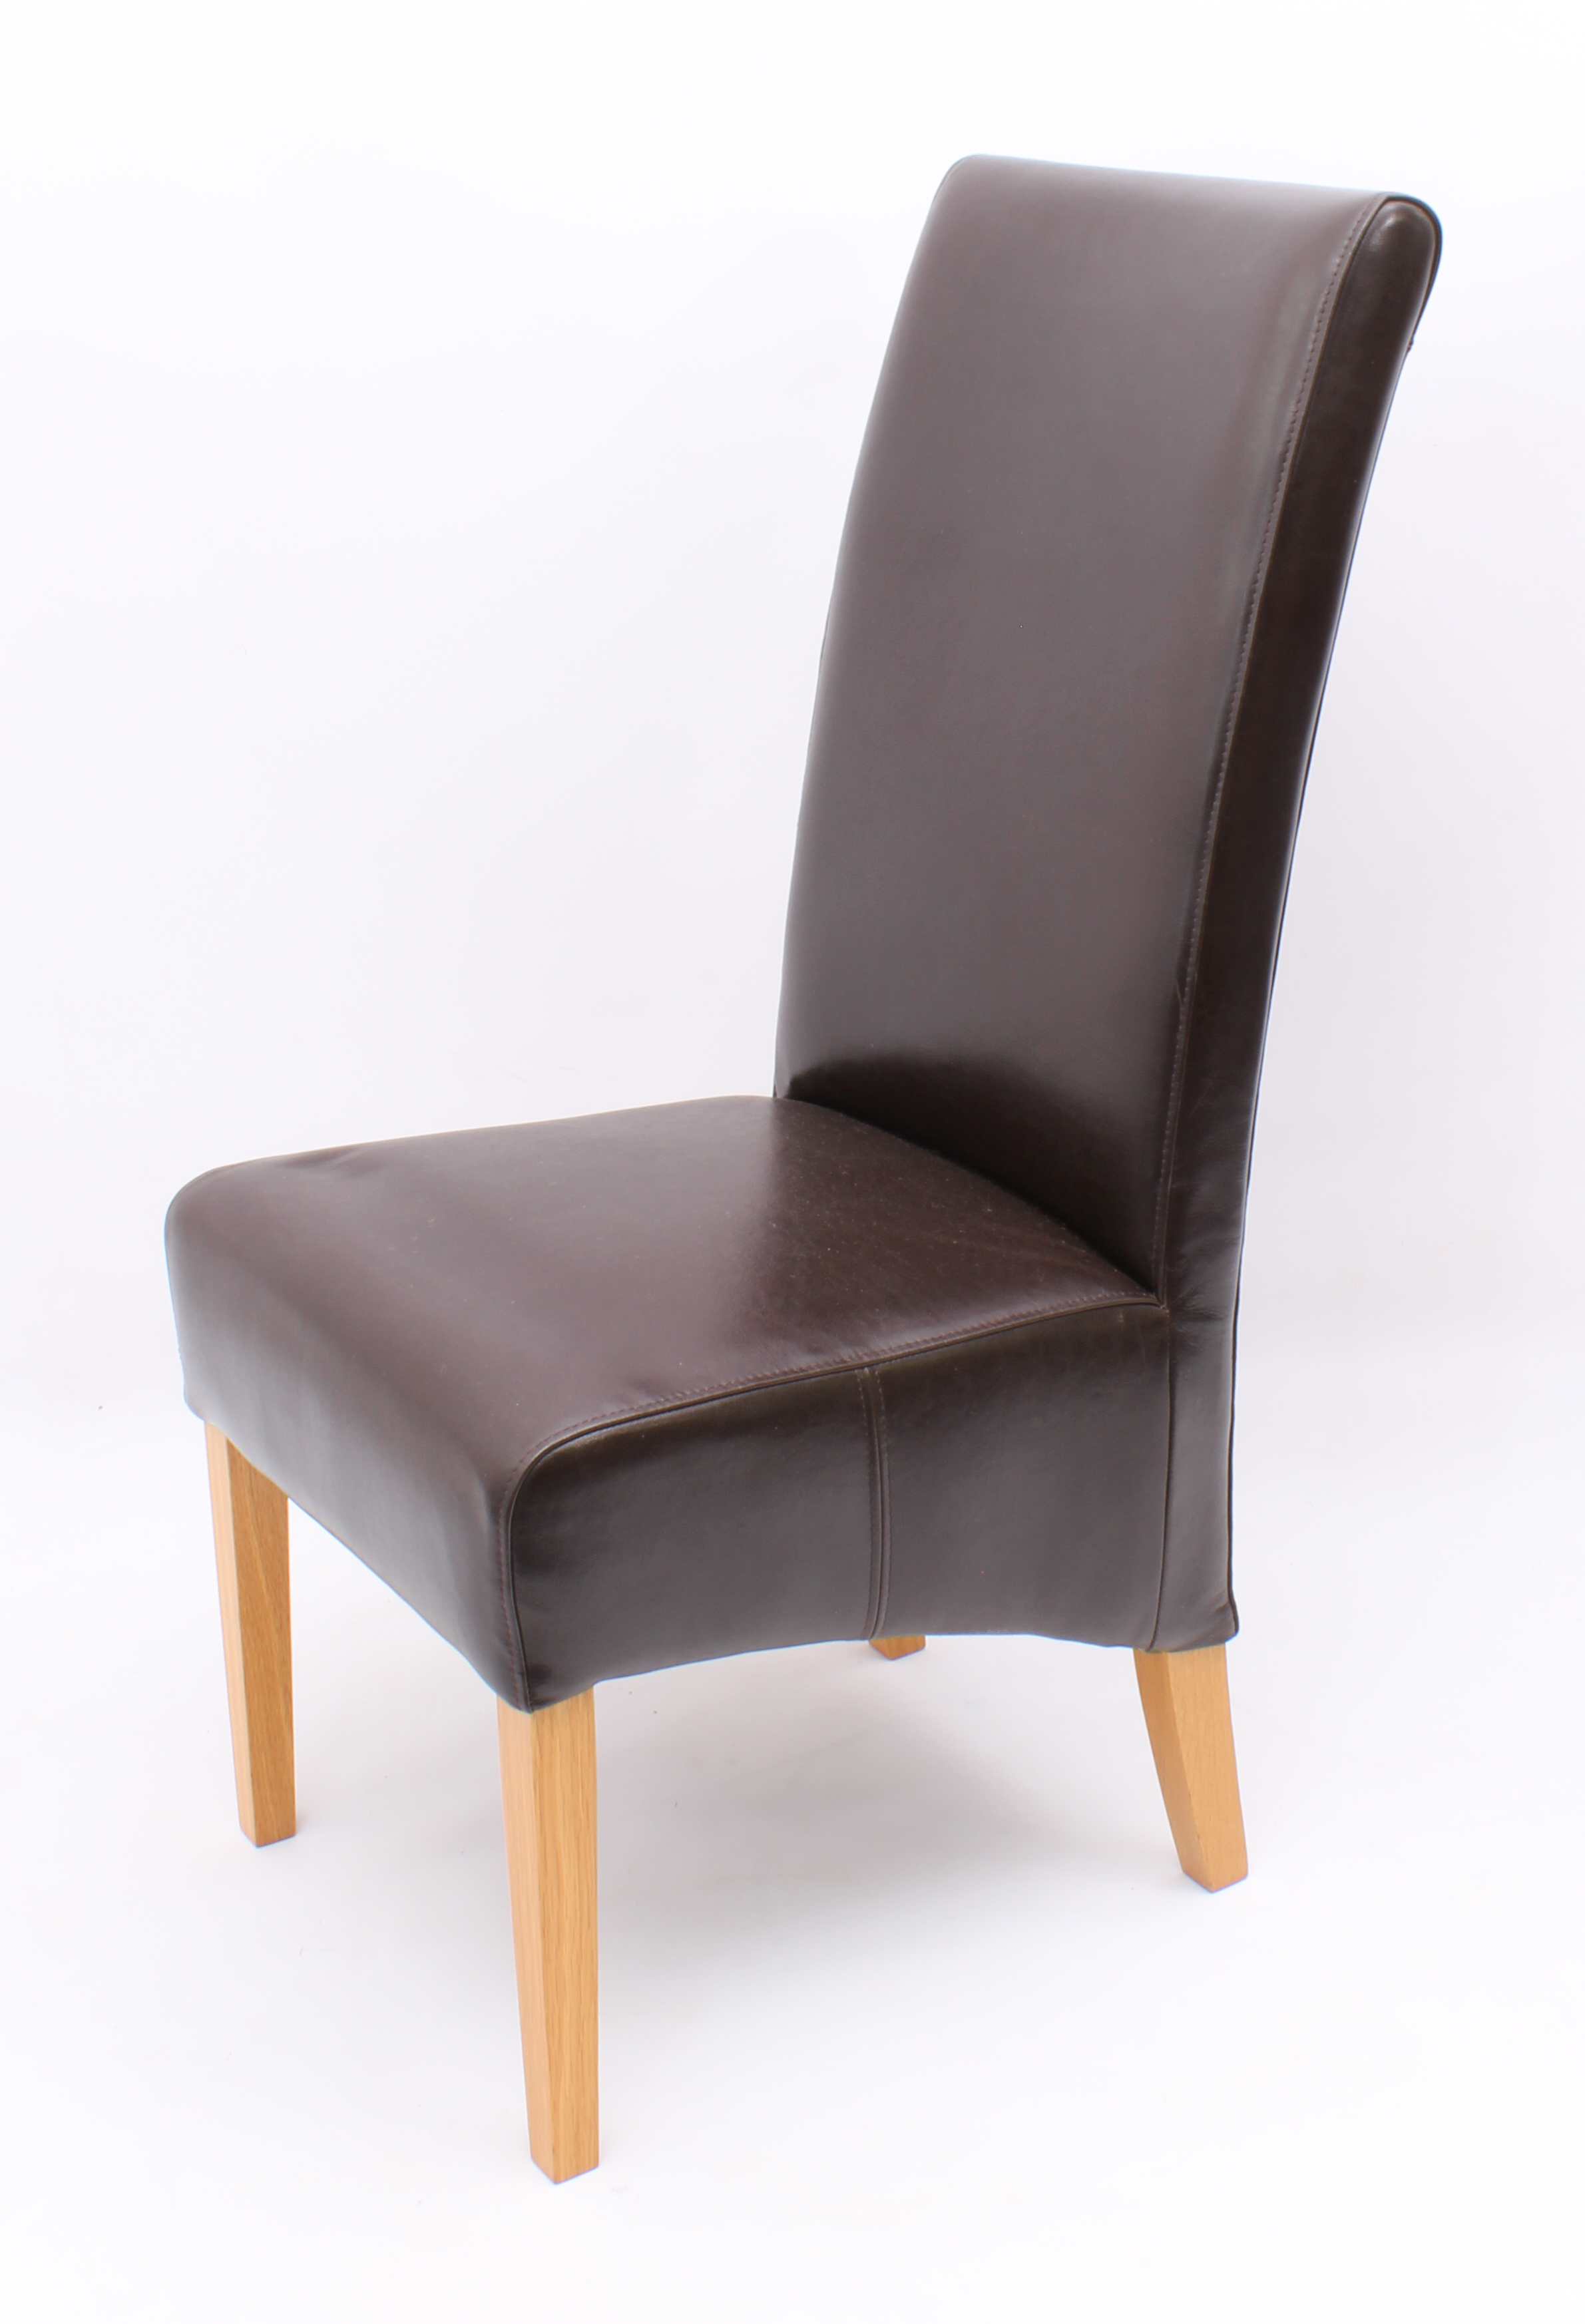 A set of four chocolate-brown leather and oak high-back dining chairs - modern, 48 cm wide, 108.5 cm - Image 2 of 3